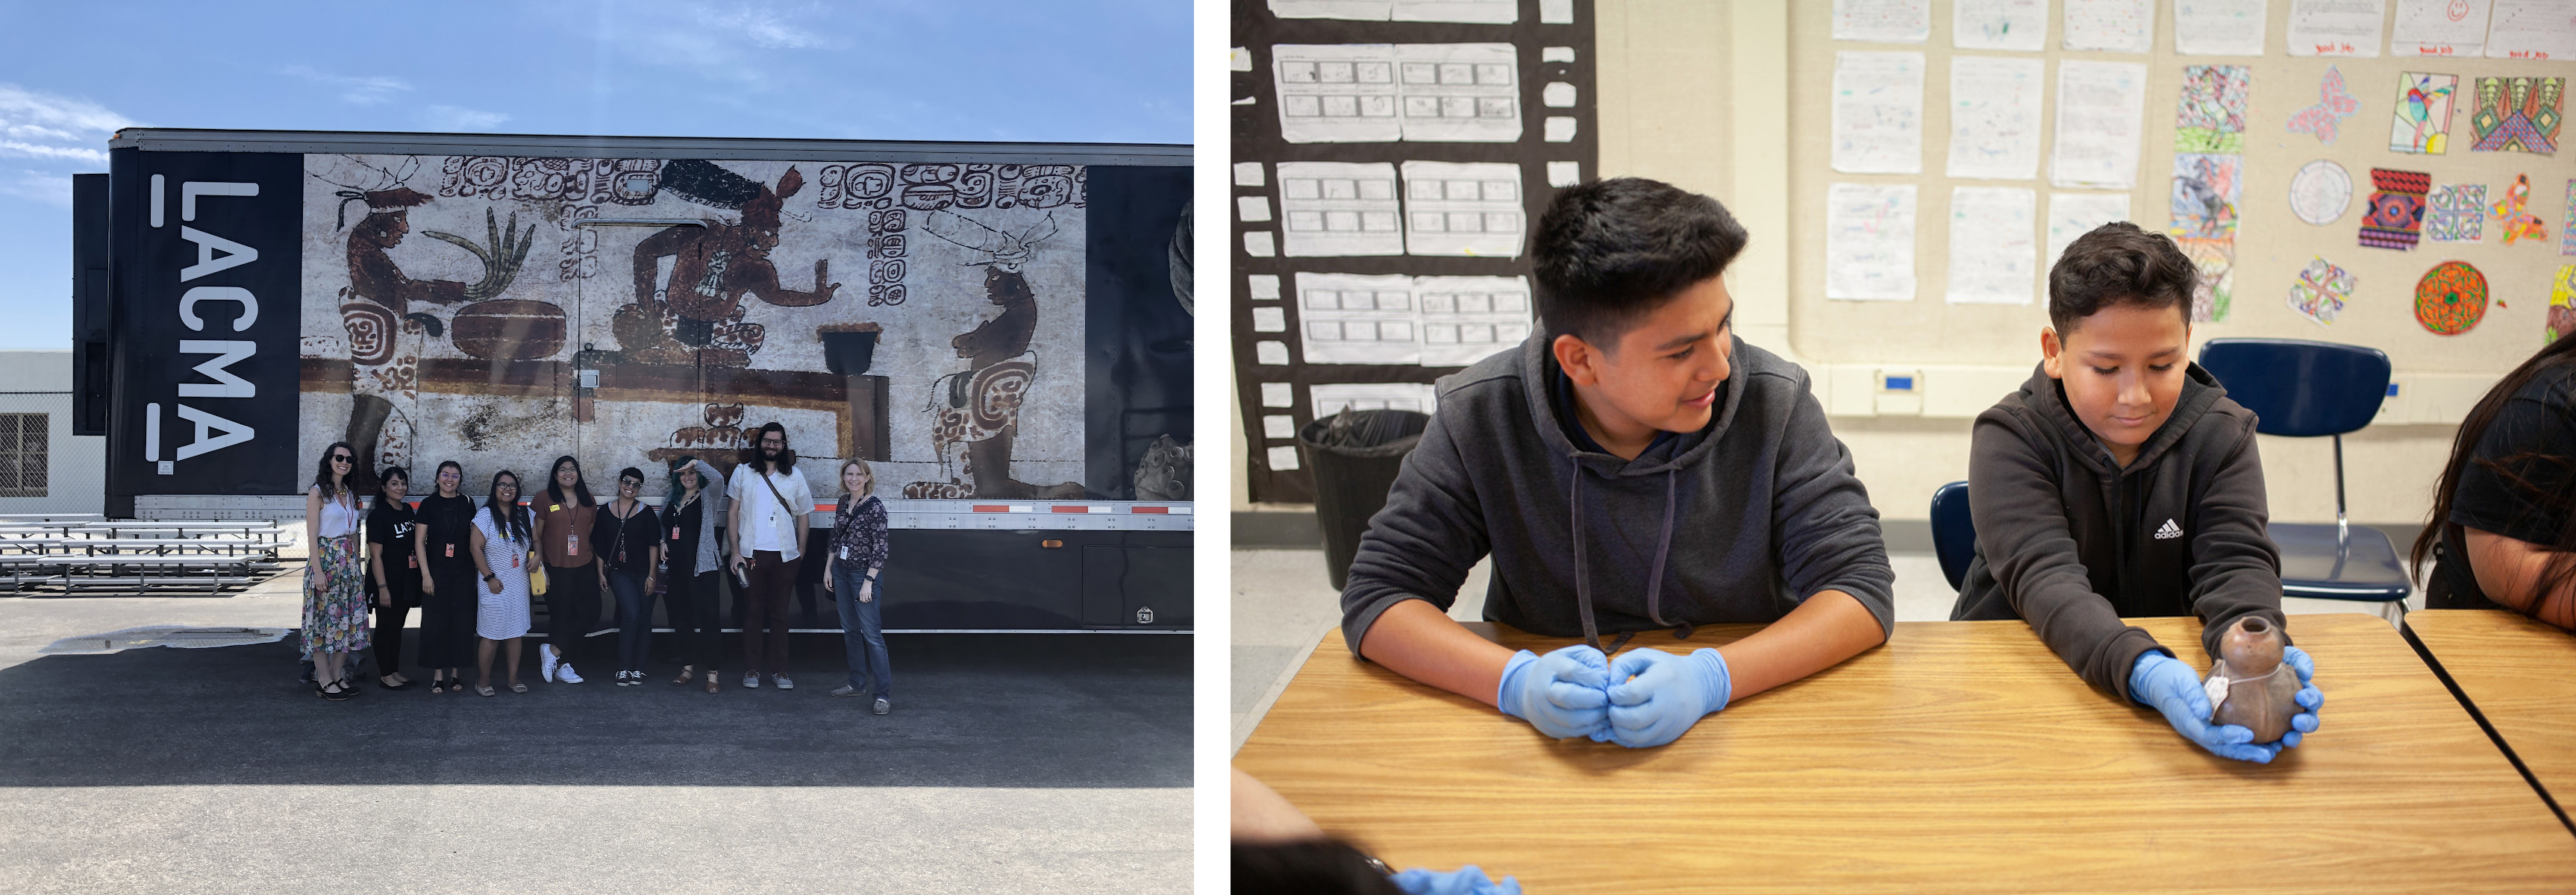 Left: LACMA mobile educators stand in front of the Maya Mobile, a 50-foot mobile classroom and art studio, 2019, photo courtesy of Holly Gillette; Right: Two students participating in the Maya Mobile program, in 2019, look closely at an Anthropomorphic Jar, 600–1600 CE, probably Colombia, Los Angeles County Museum of Art, The Bernard and Edith Lewin Collection of Mexican Art, photo © Museum Associates, by Stephenie Pashkowsky